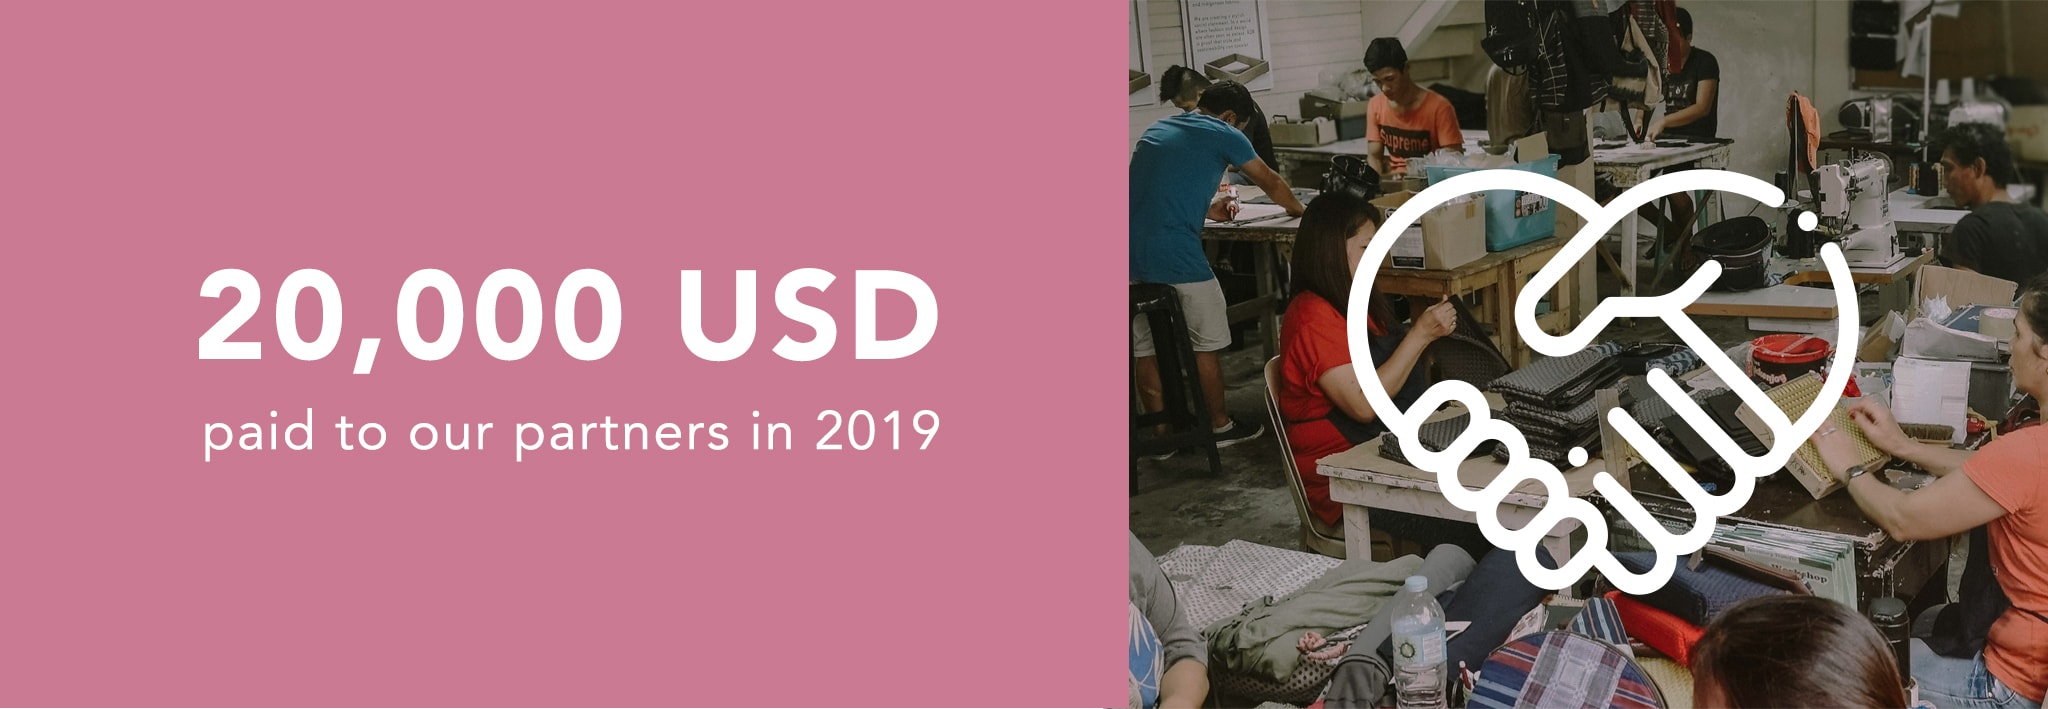 Cambio & Co. contributed 20,000USD to social enterprise partners in the Philippines in 2019.